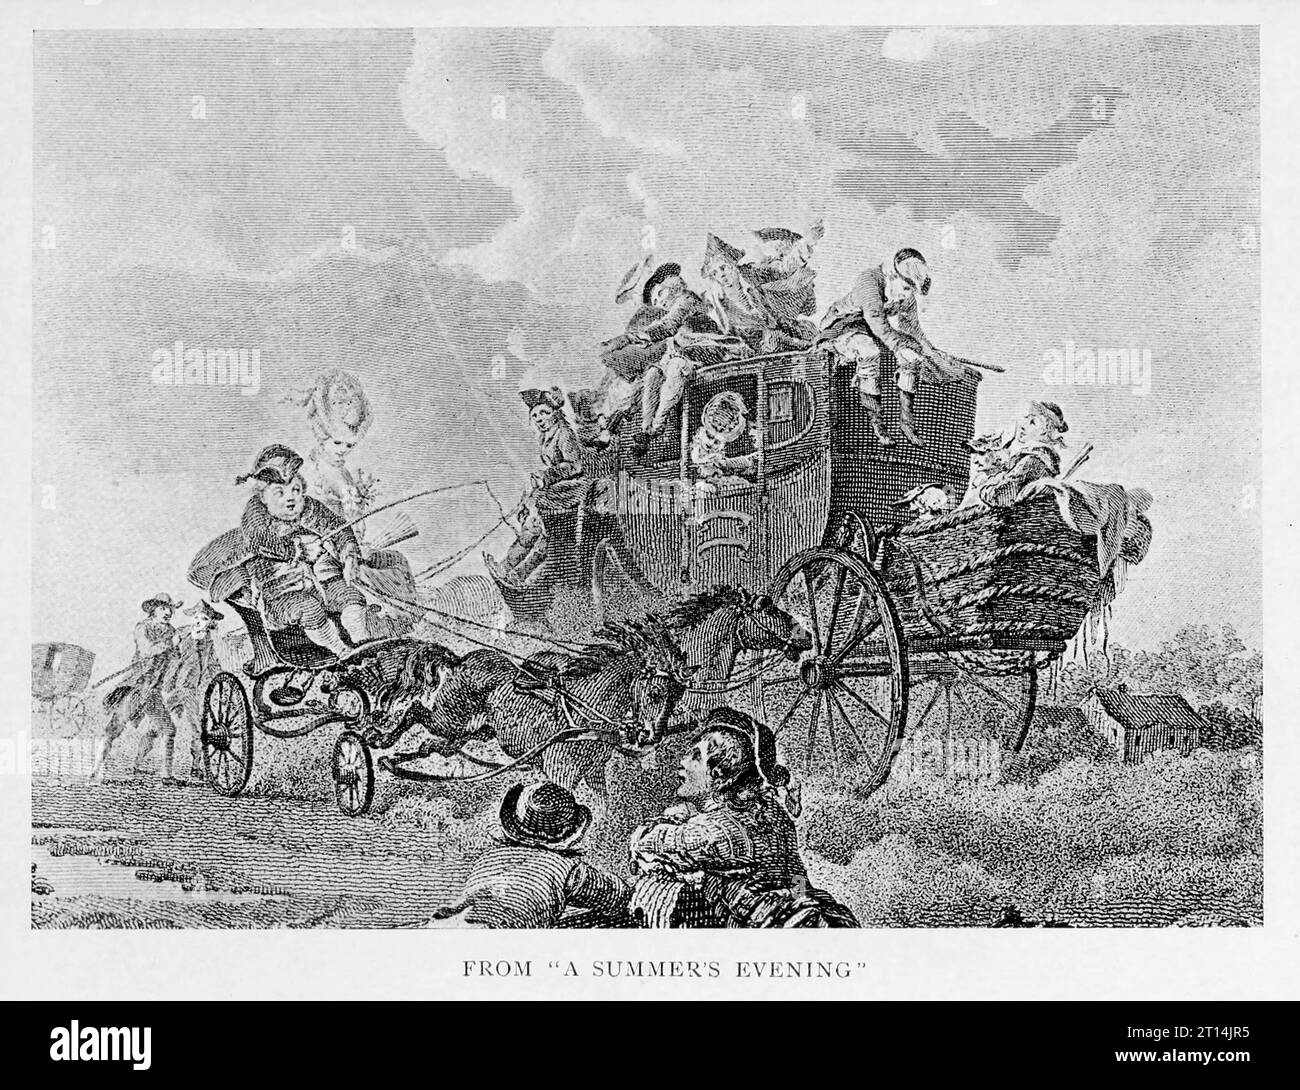 stagecoach, cart and horses from a Summer's Evening from the book ' Jane Austen and her times ' by Mitton, G. E. (Geraldine Edith); Austen, Jane, 1775-1817 Publication date 1905 PublisherLondon, Methuen and co Stock Photo